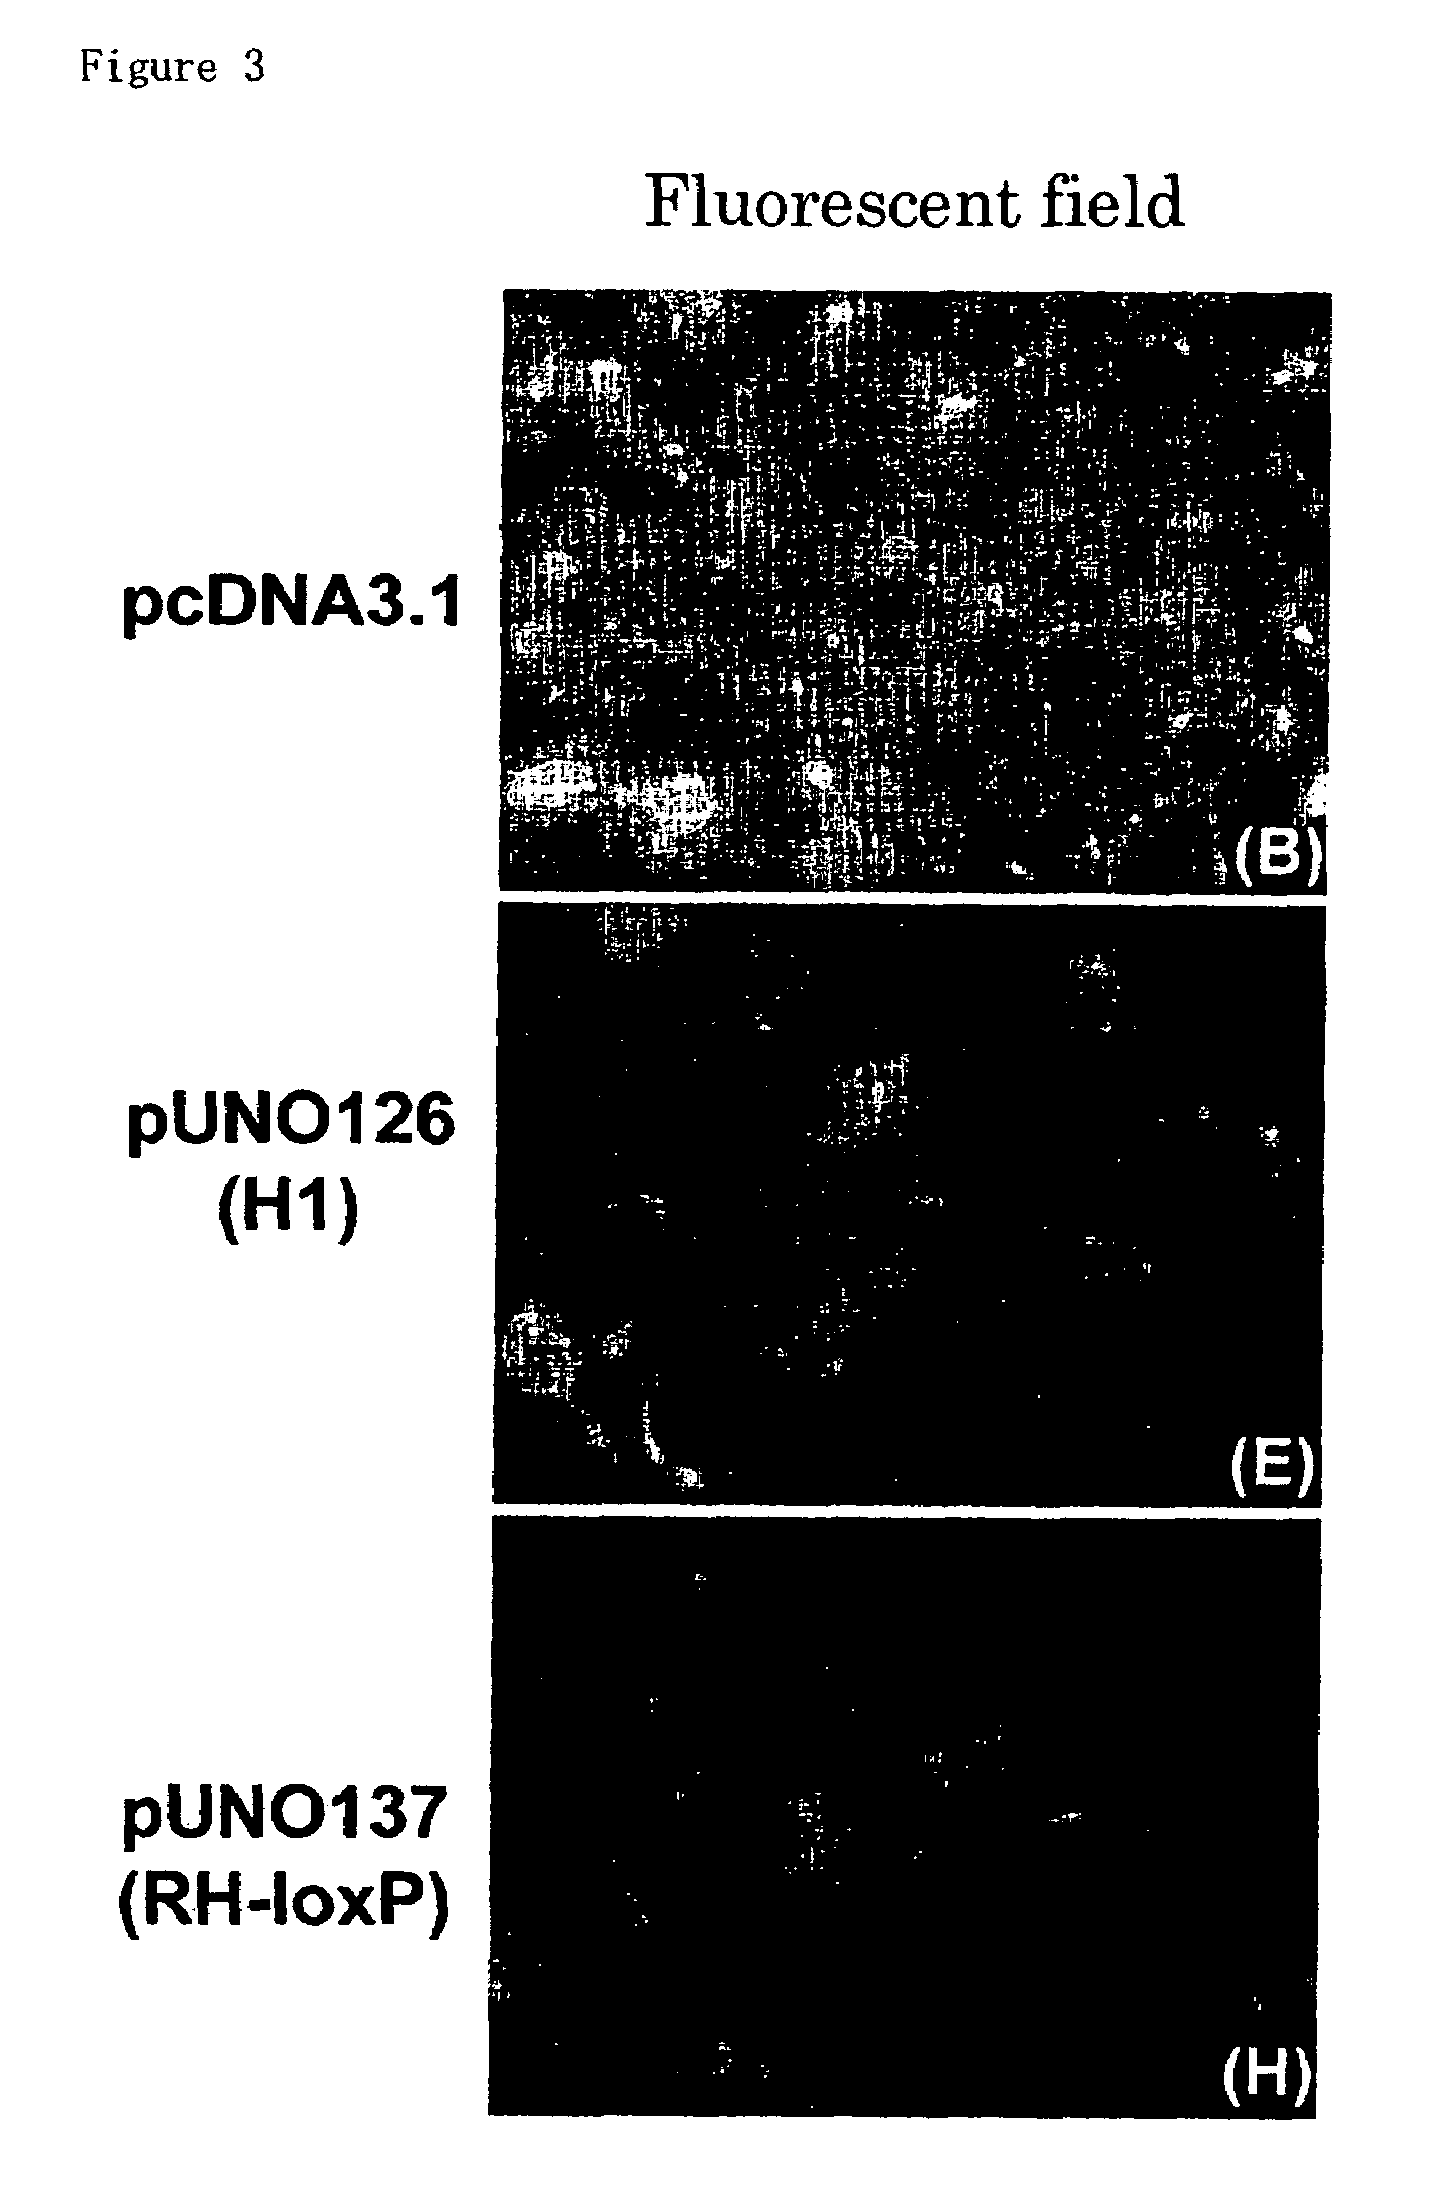 RNA polymerase III promoter, process for producing the same and method of using the same